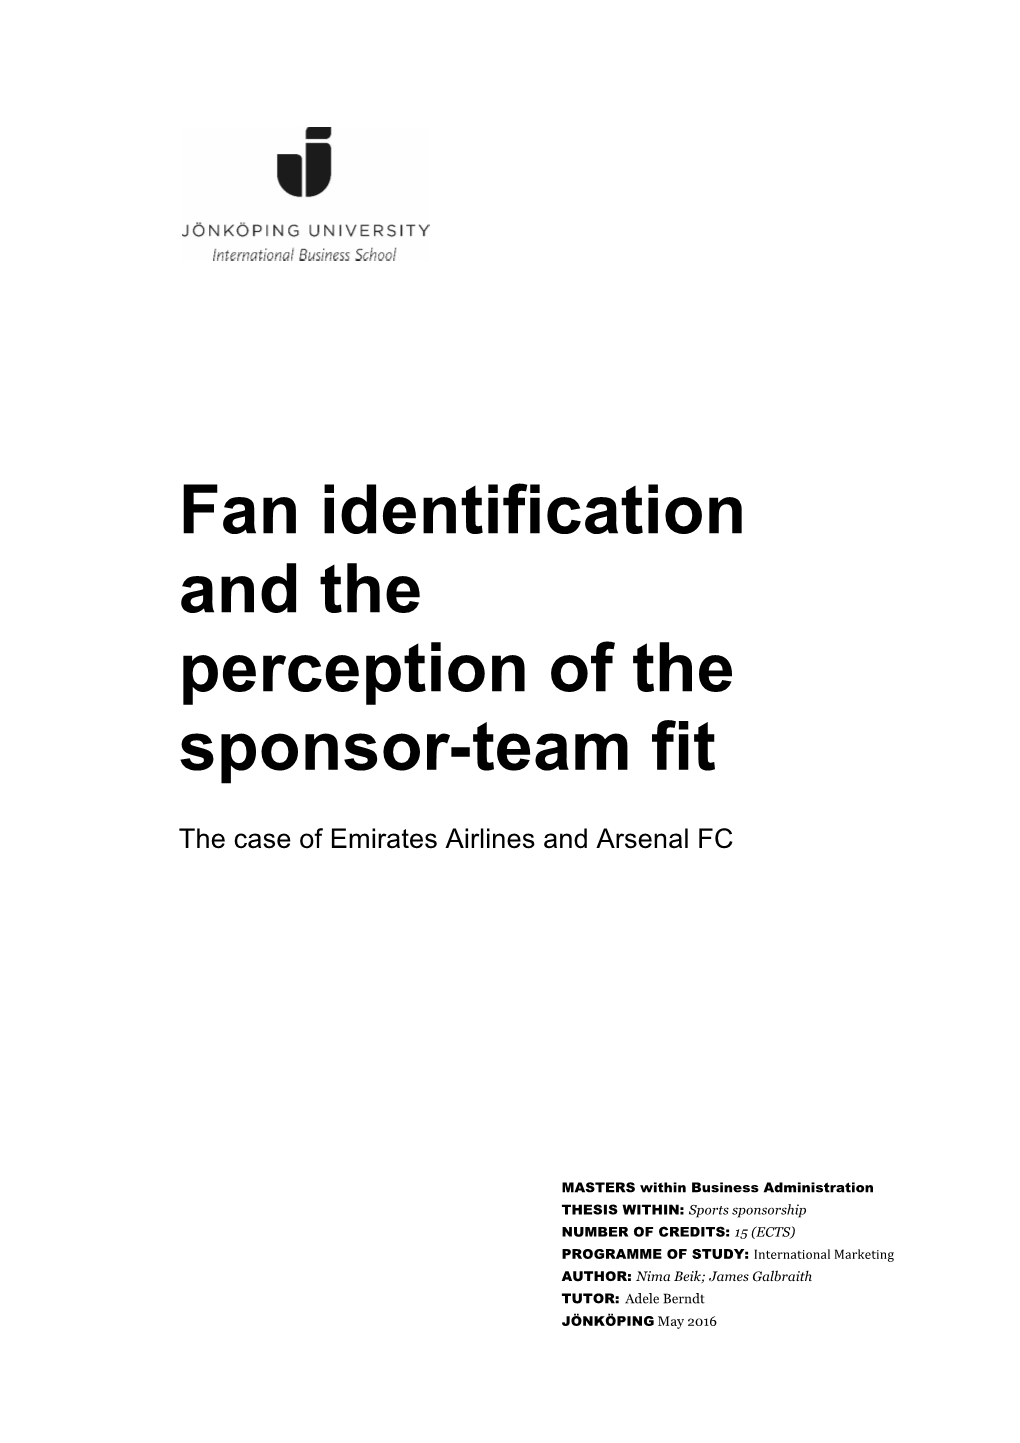 Fan Identification and the Perception of the Sponsor-Team Fit